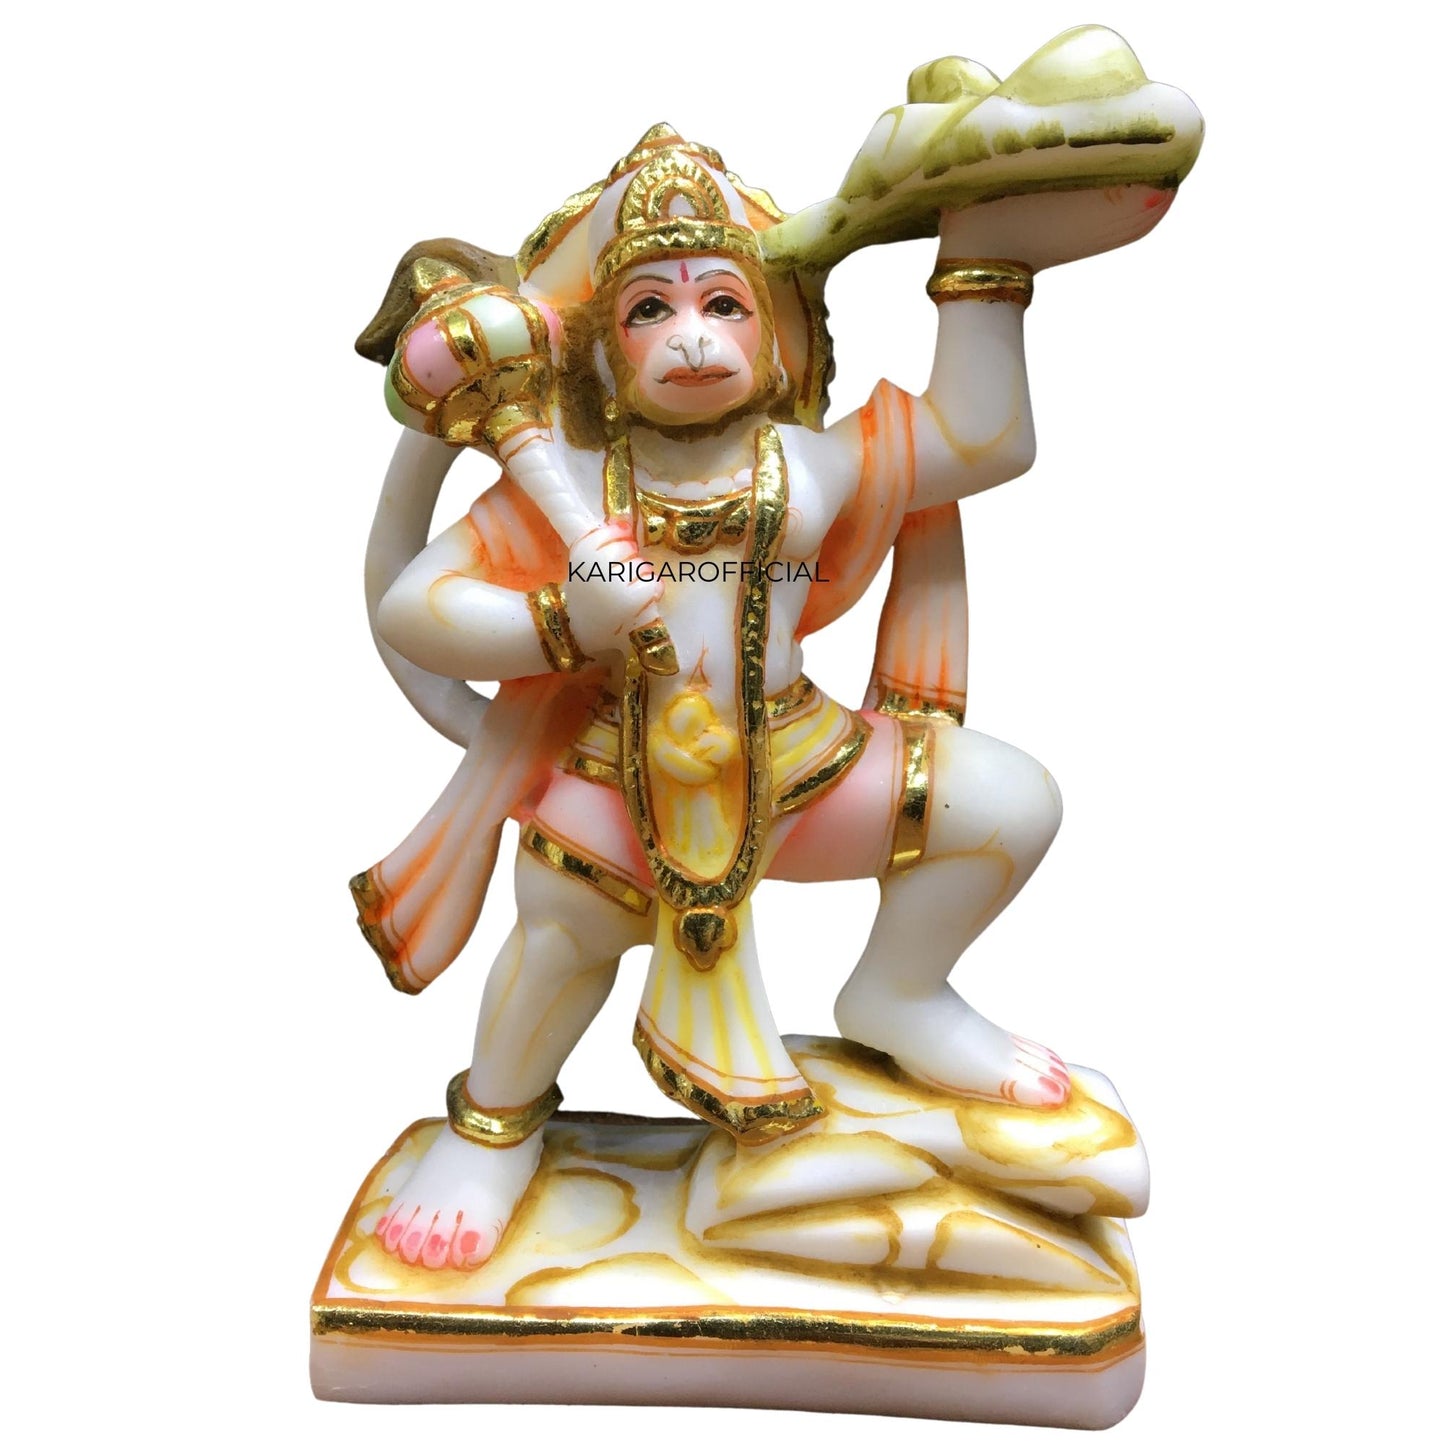 New Hanuman Statue, Multicolor 6 inches Hand Painted Marble Blessing Bajrang Bali Figurine, Natural Powerlifter Hindu Monkey god of Devotion, Strength, Bhakti, Perfect for Small Home Temple Decoration